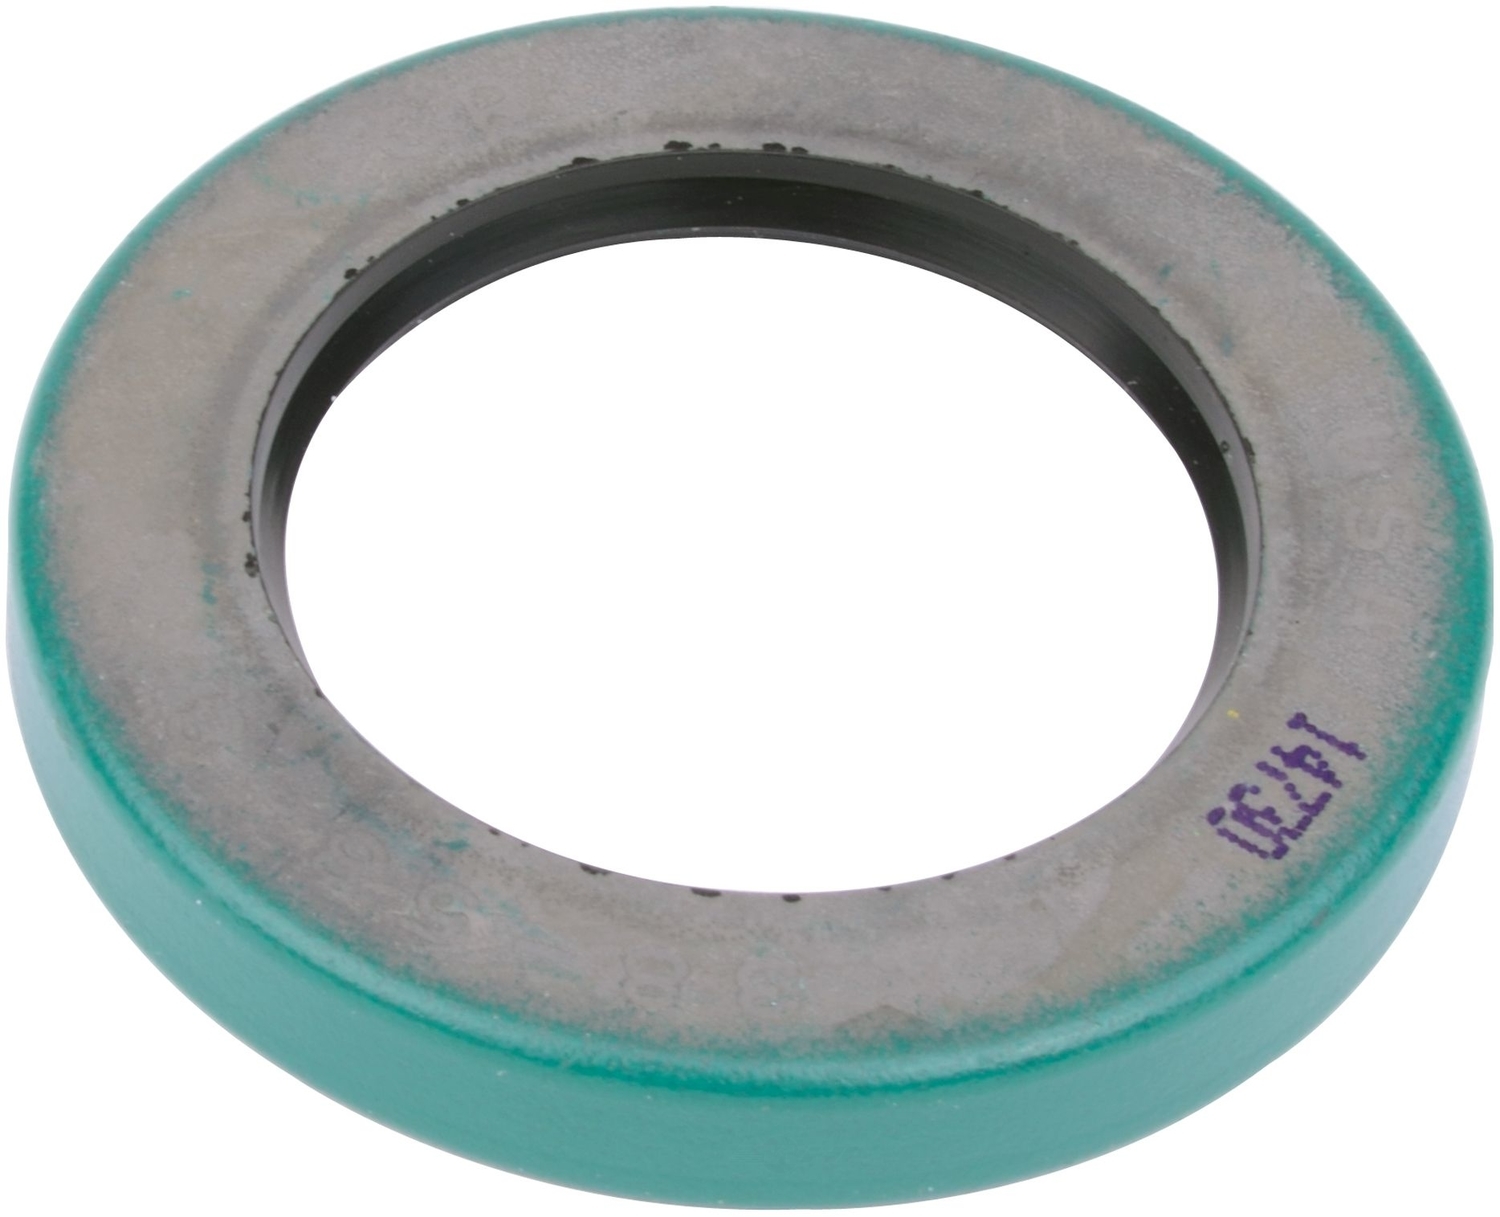 SKF (CHICAGO RAWHIDE) - Auto Trans Adapter Housing Seal - SKF 14730